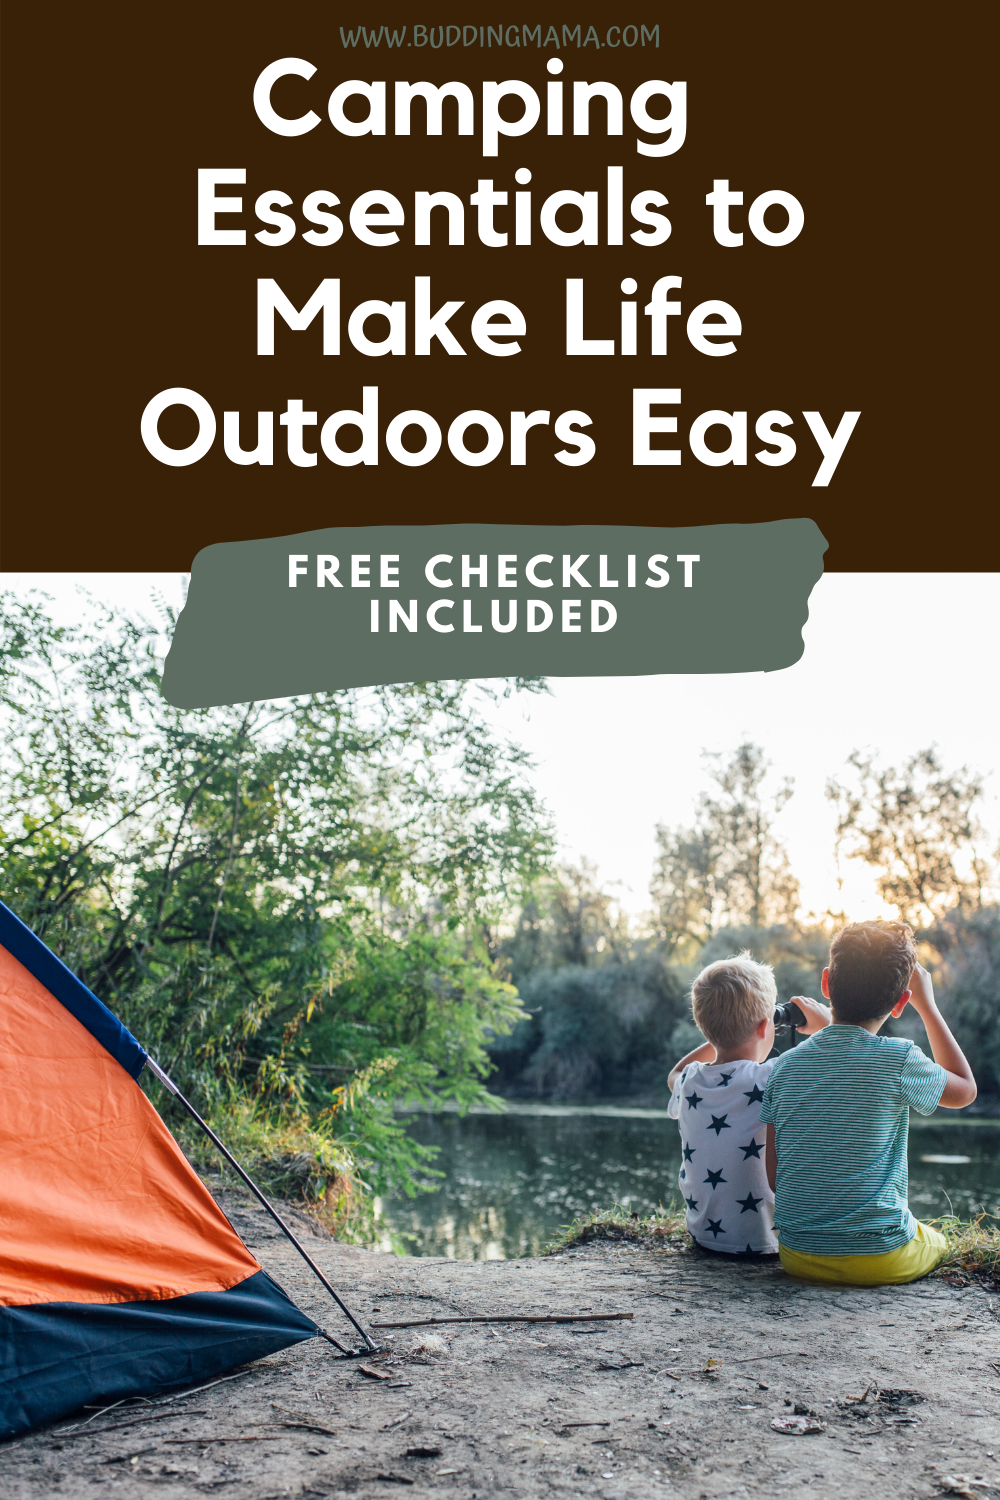 EXPLORING THE GREAT OUTDOORS THINGS TO DO CAMPING ACTIVITIES FOR KIDS FREEBIE buddingmama essentials checklist for families